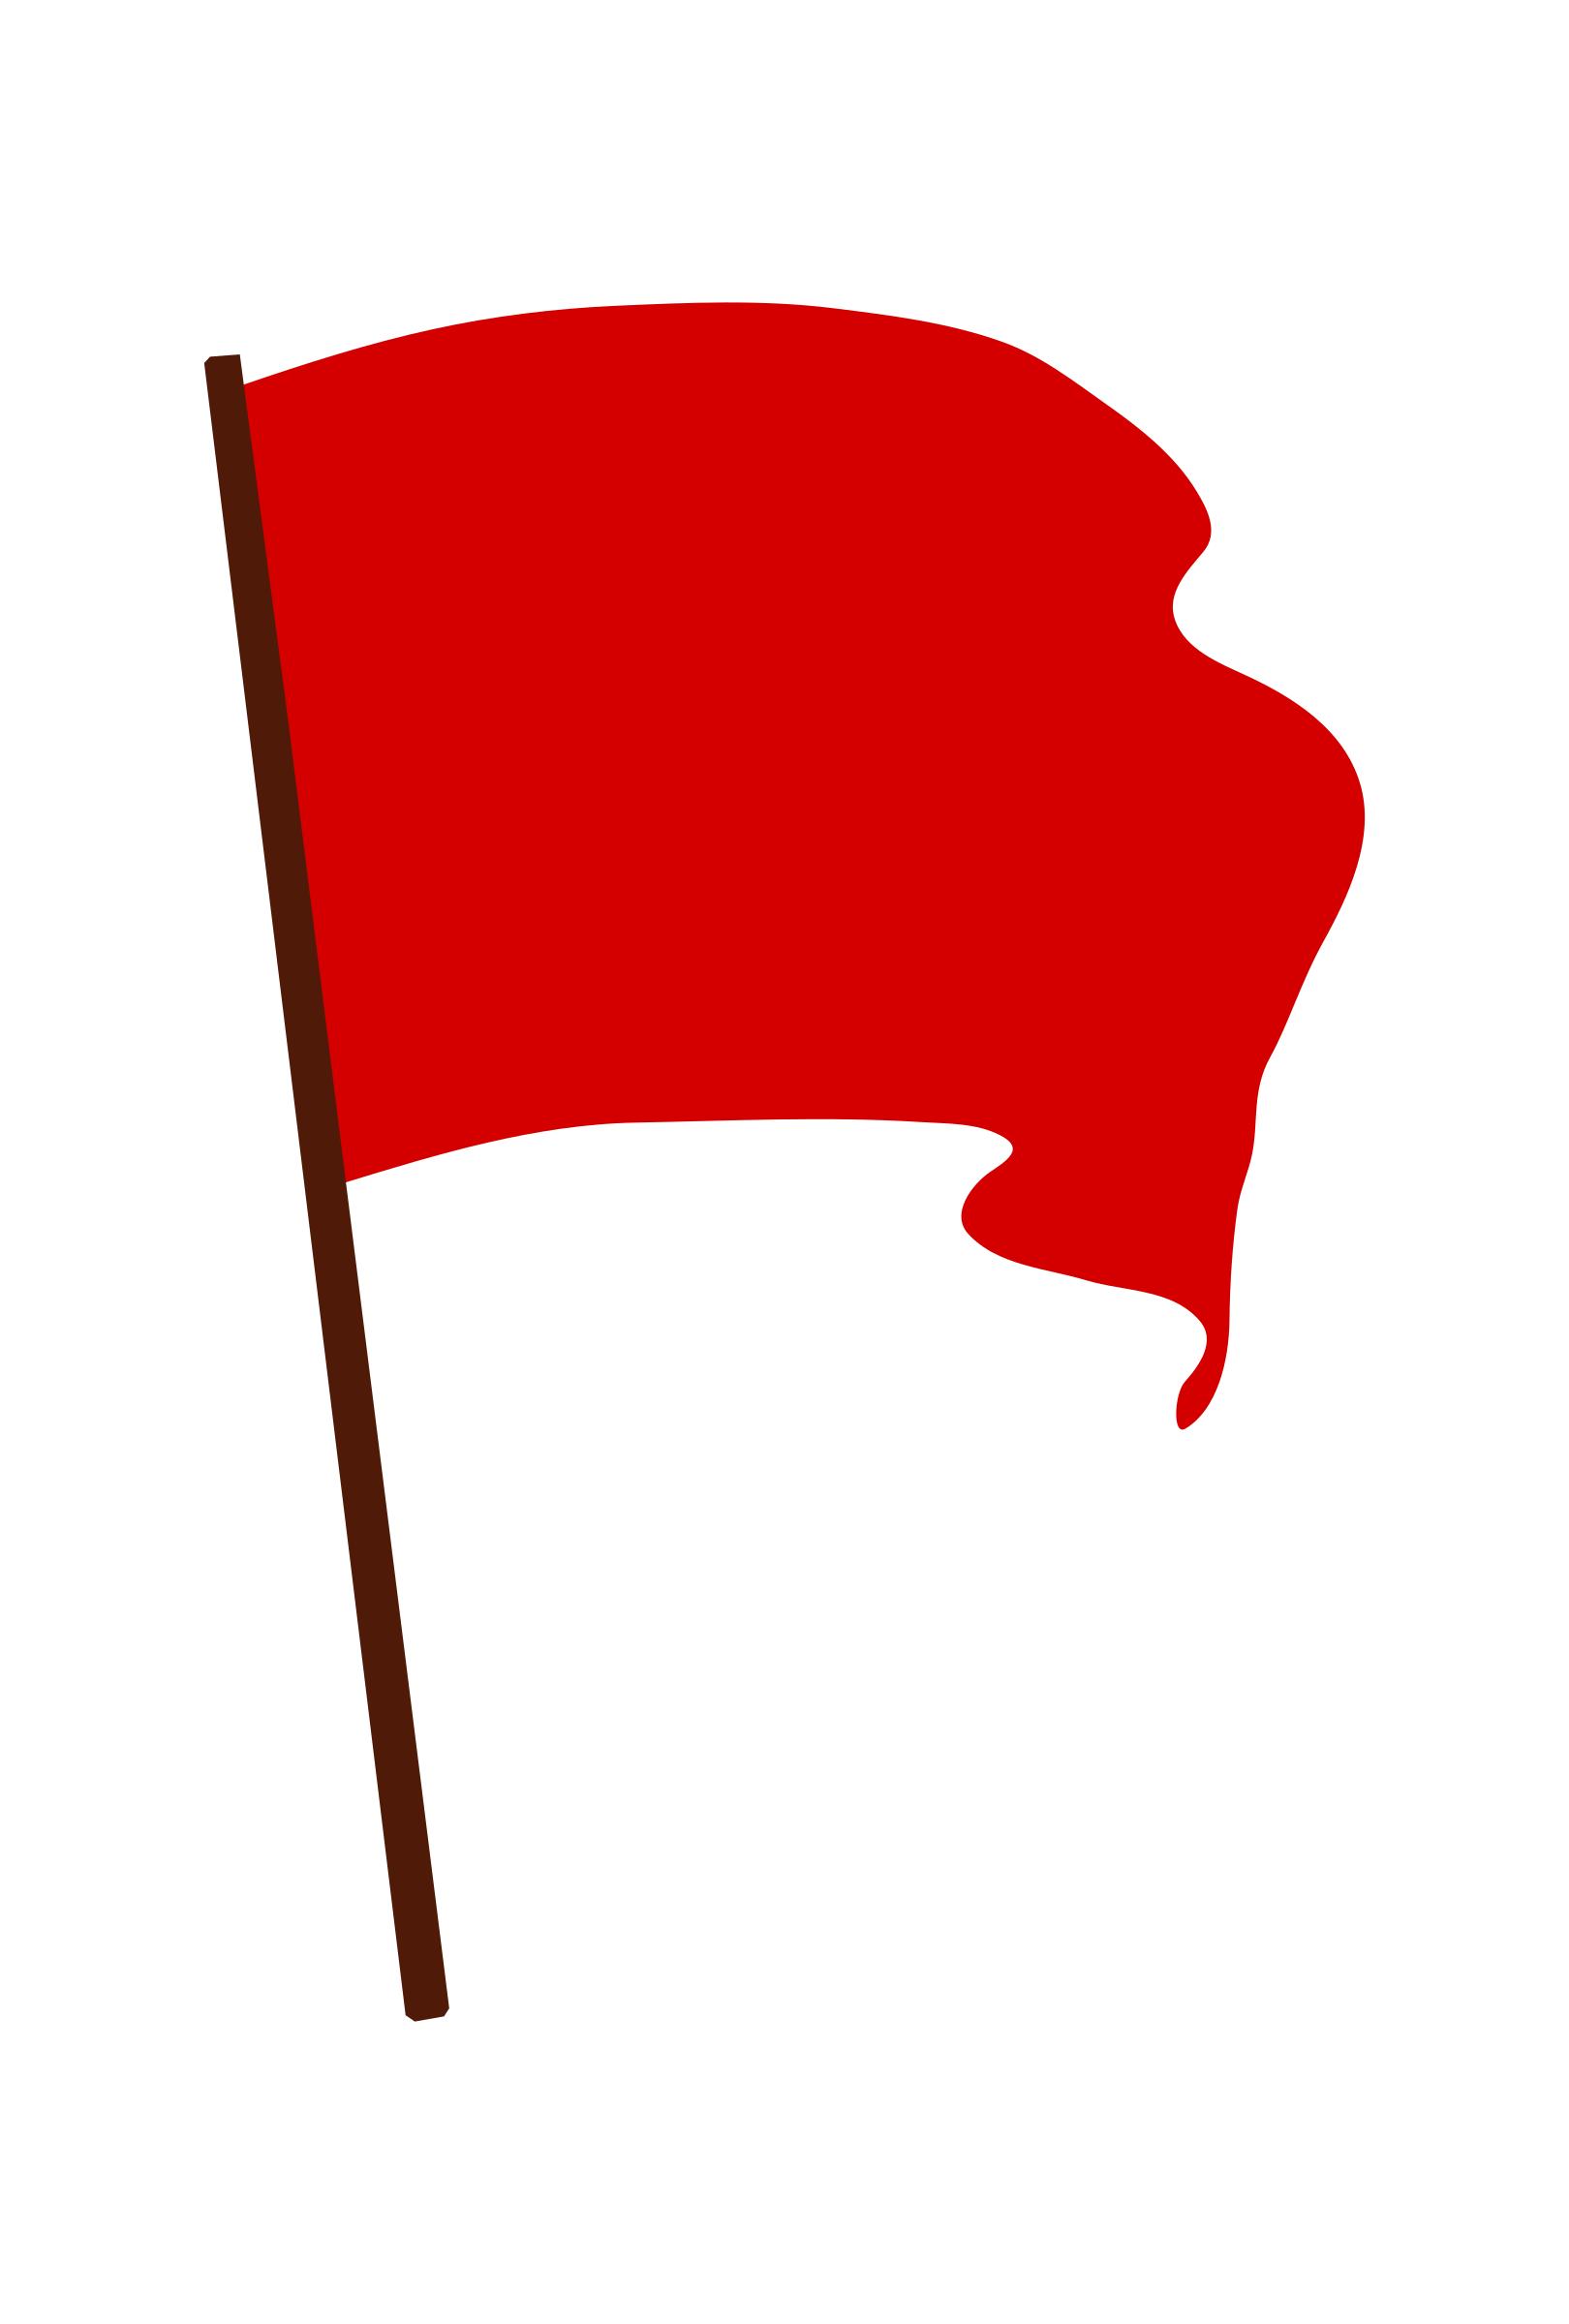 Waving Red Flag png icons